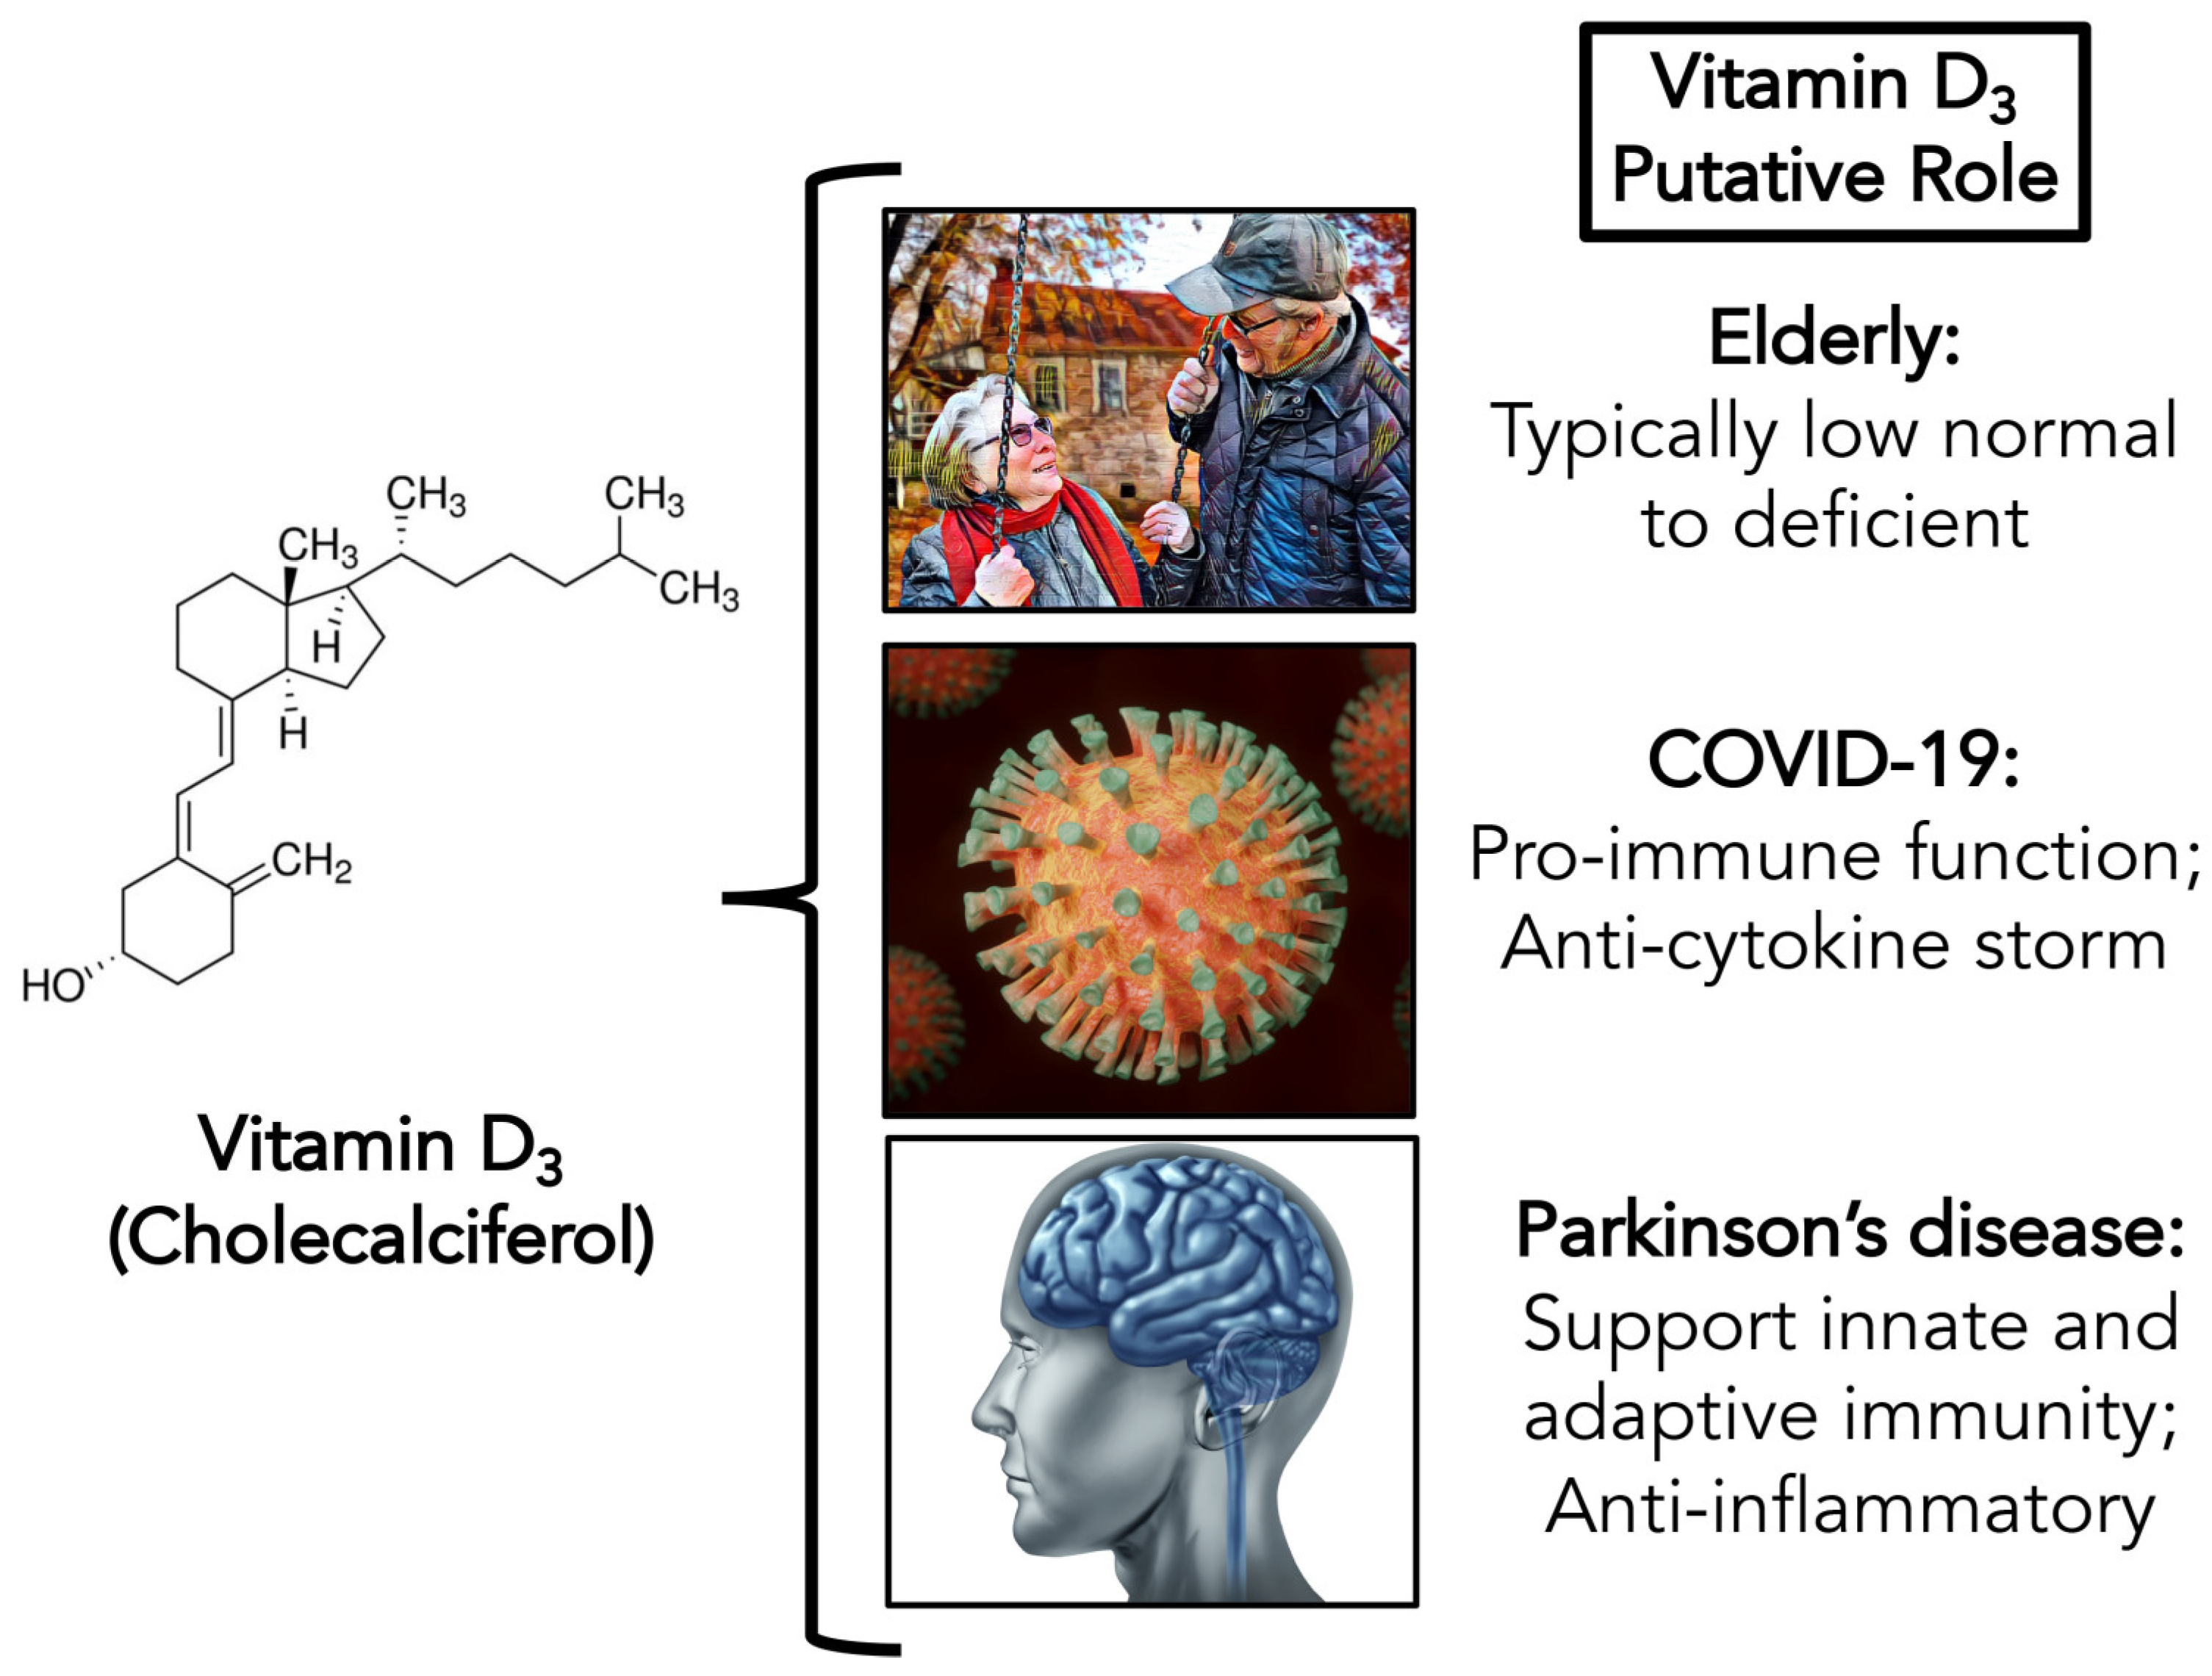 Brain Sciences | Free Full-Text | Potential Role of Vitamin D in the  Elderly to Resist COVID-19 and to Slow Progression of Parkinson's Disease